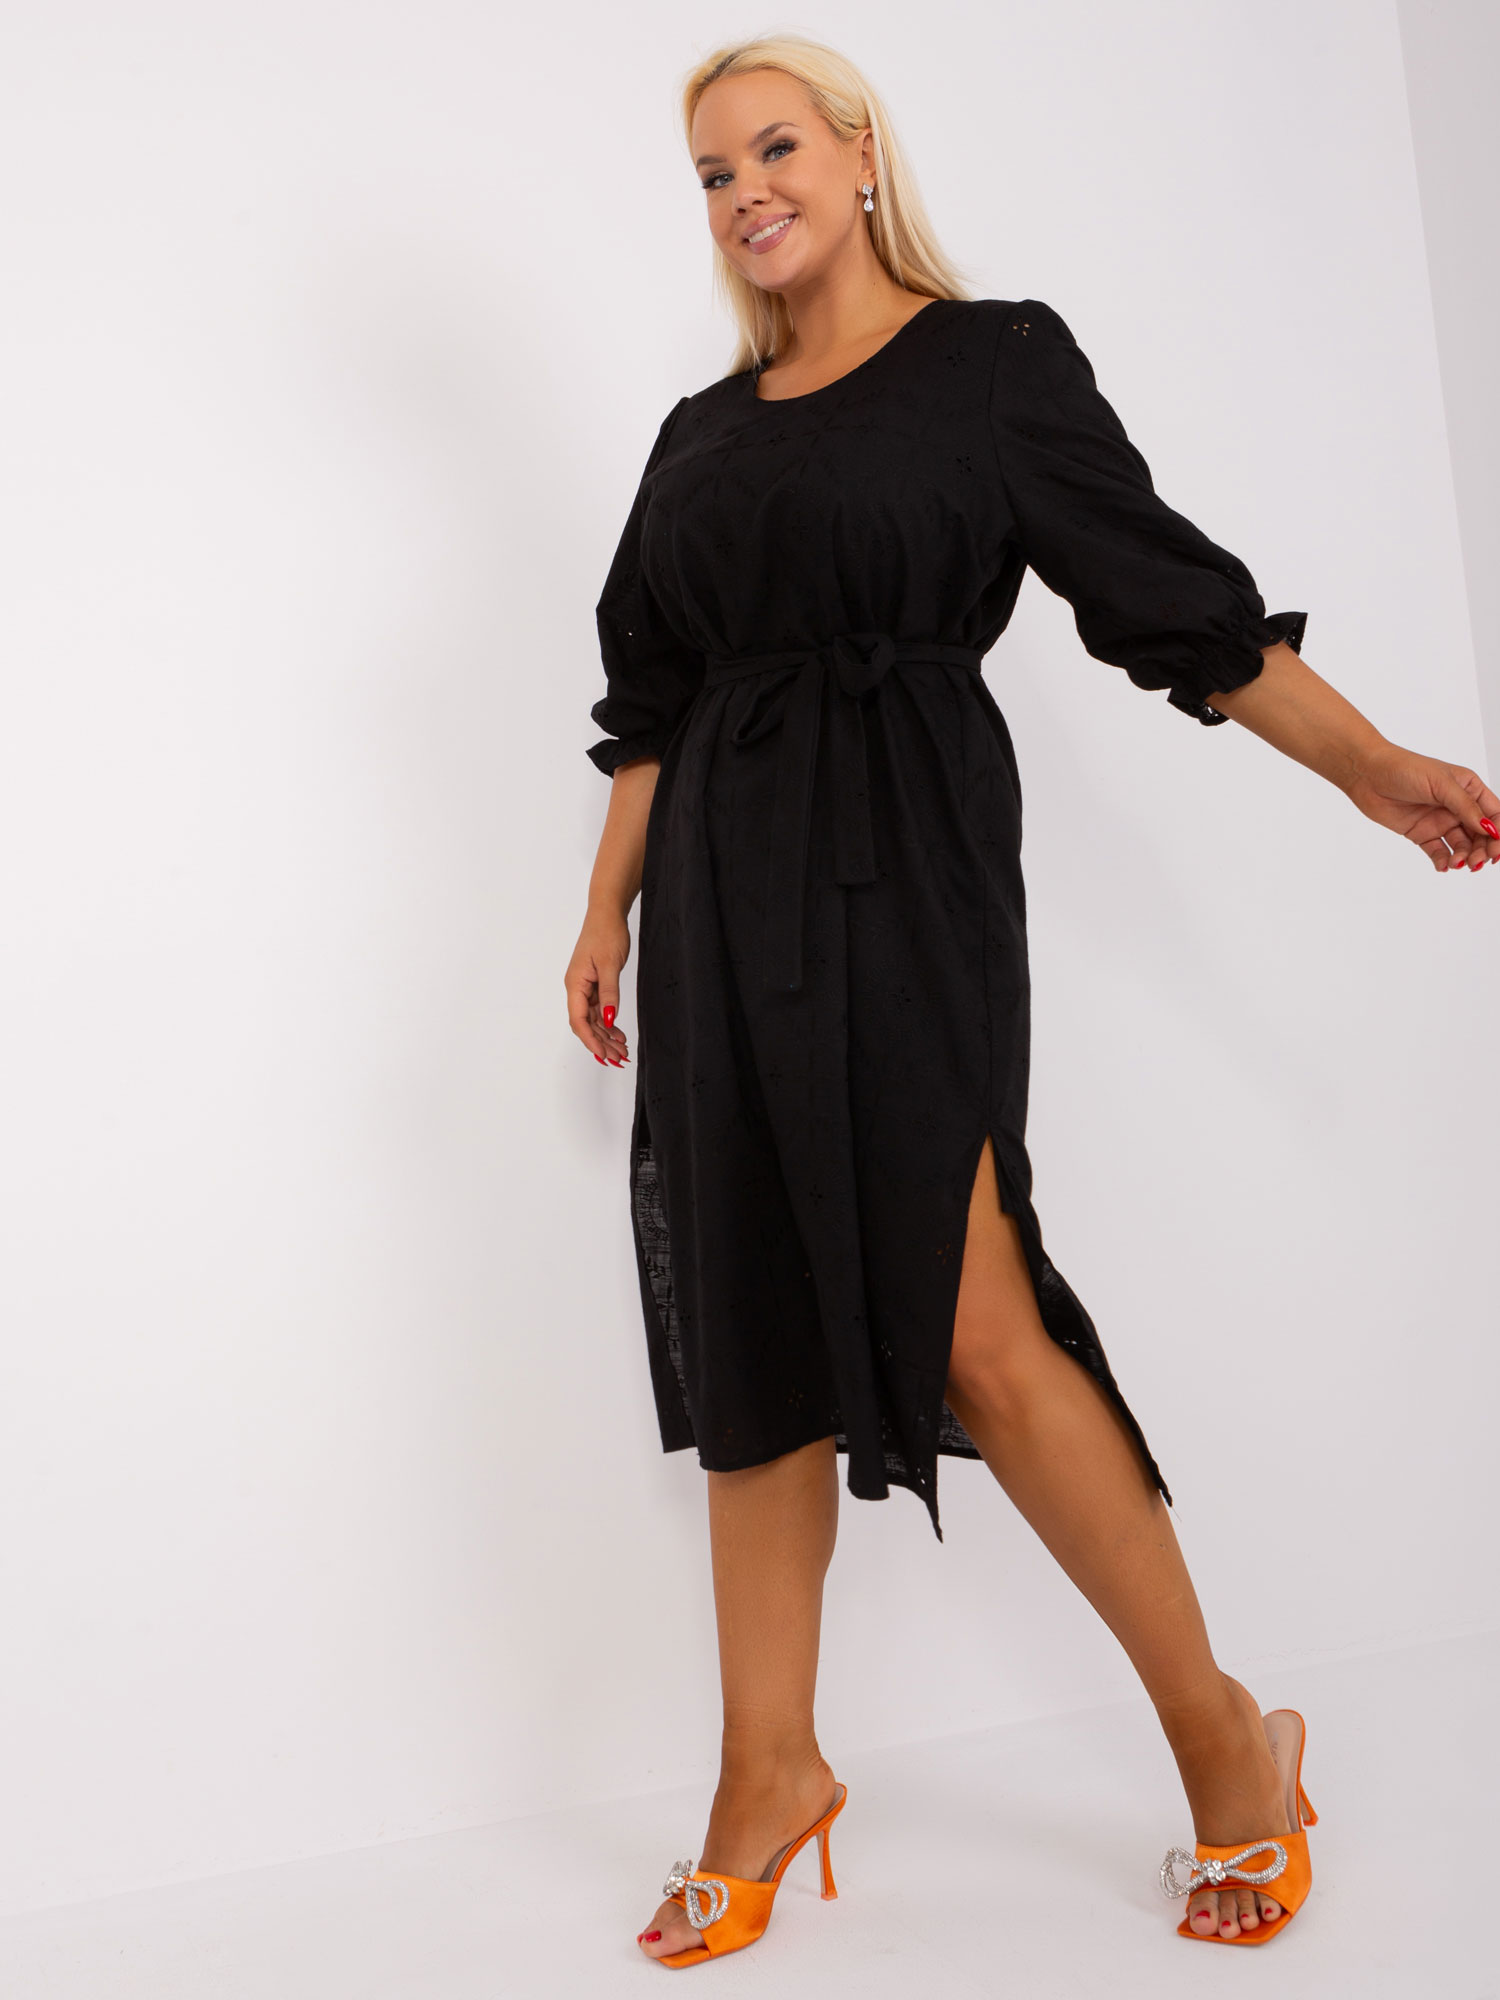 Black dress size plus with 3/4 sleeves